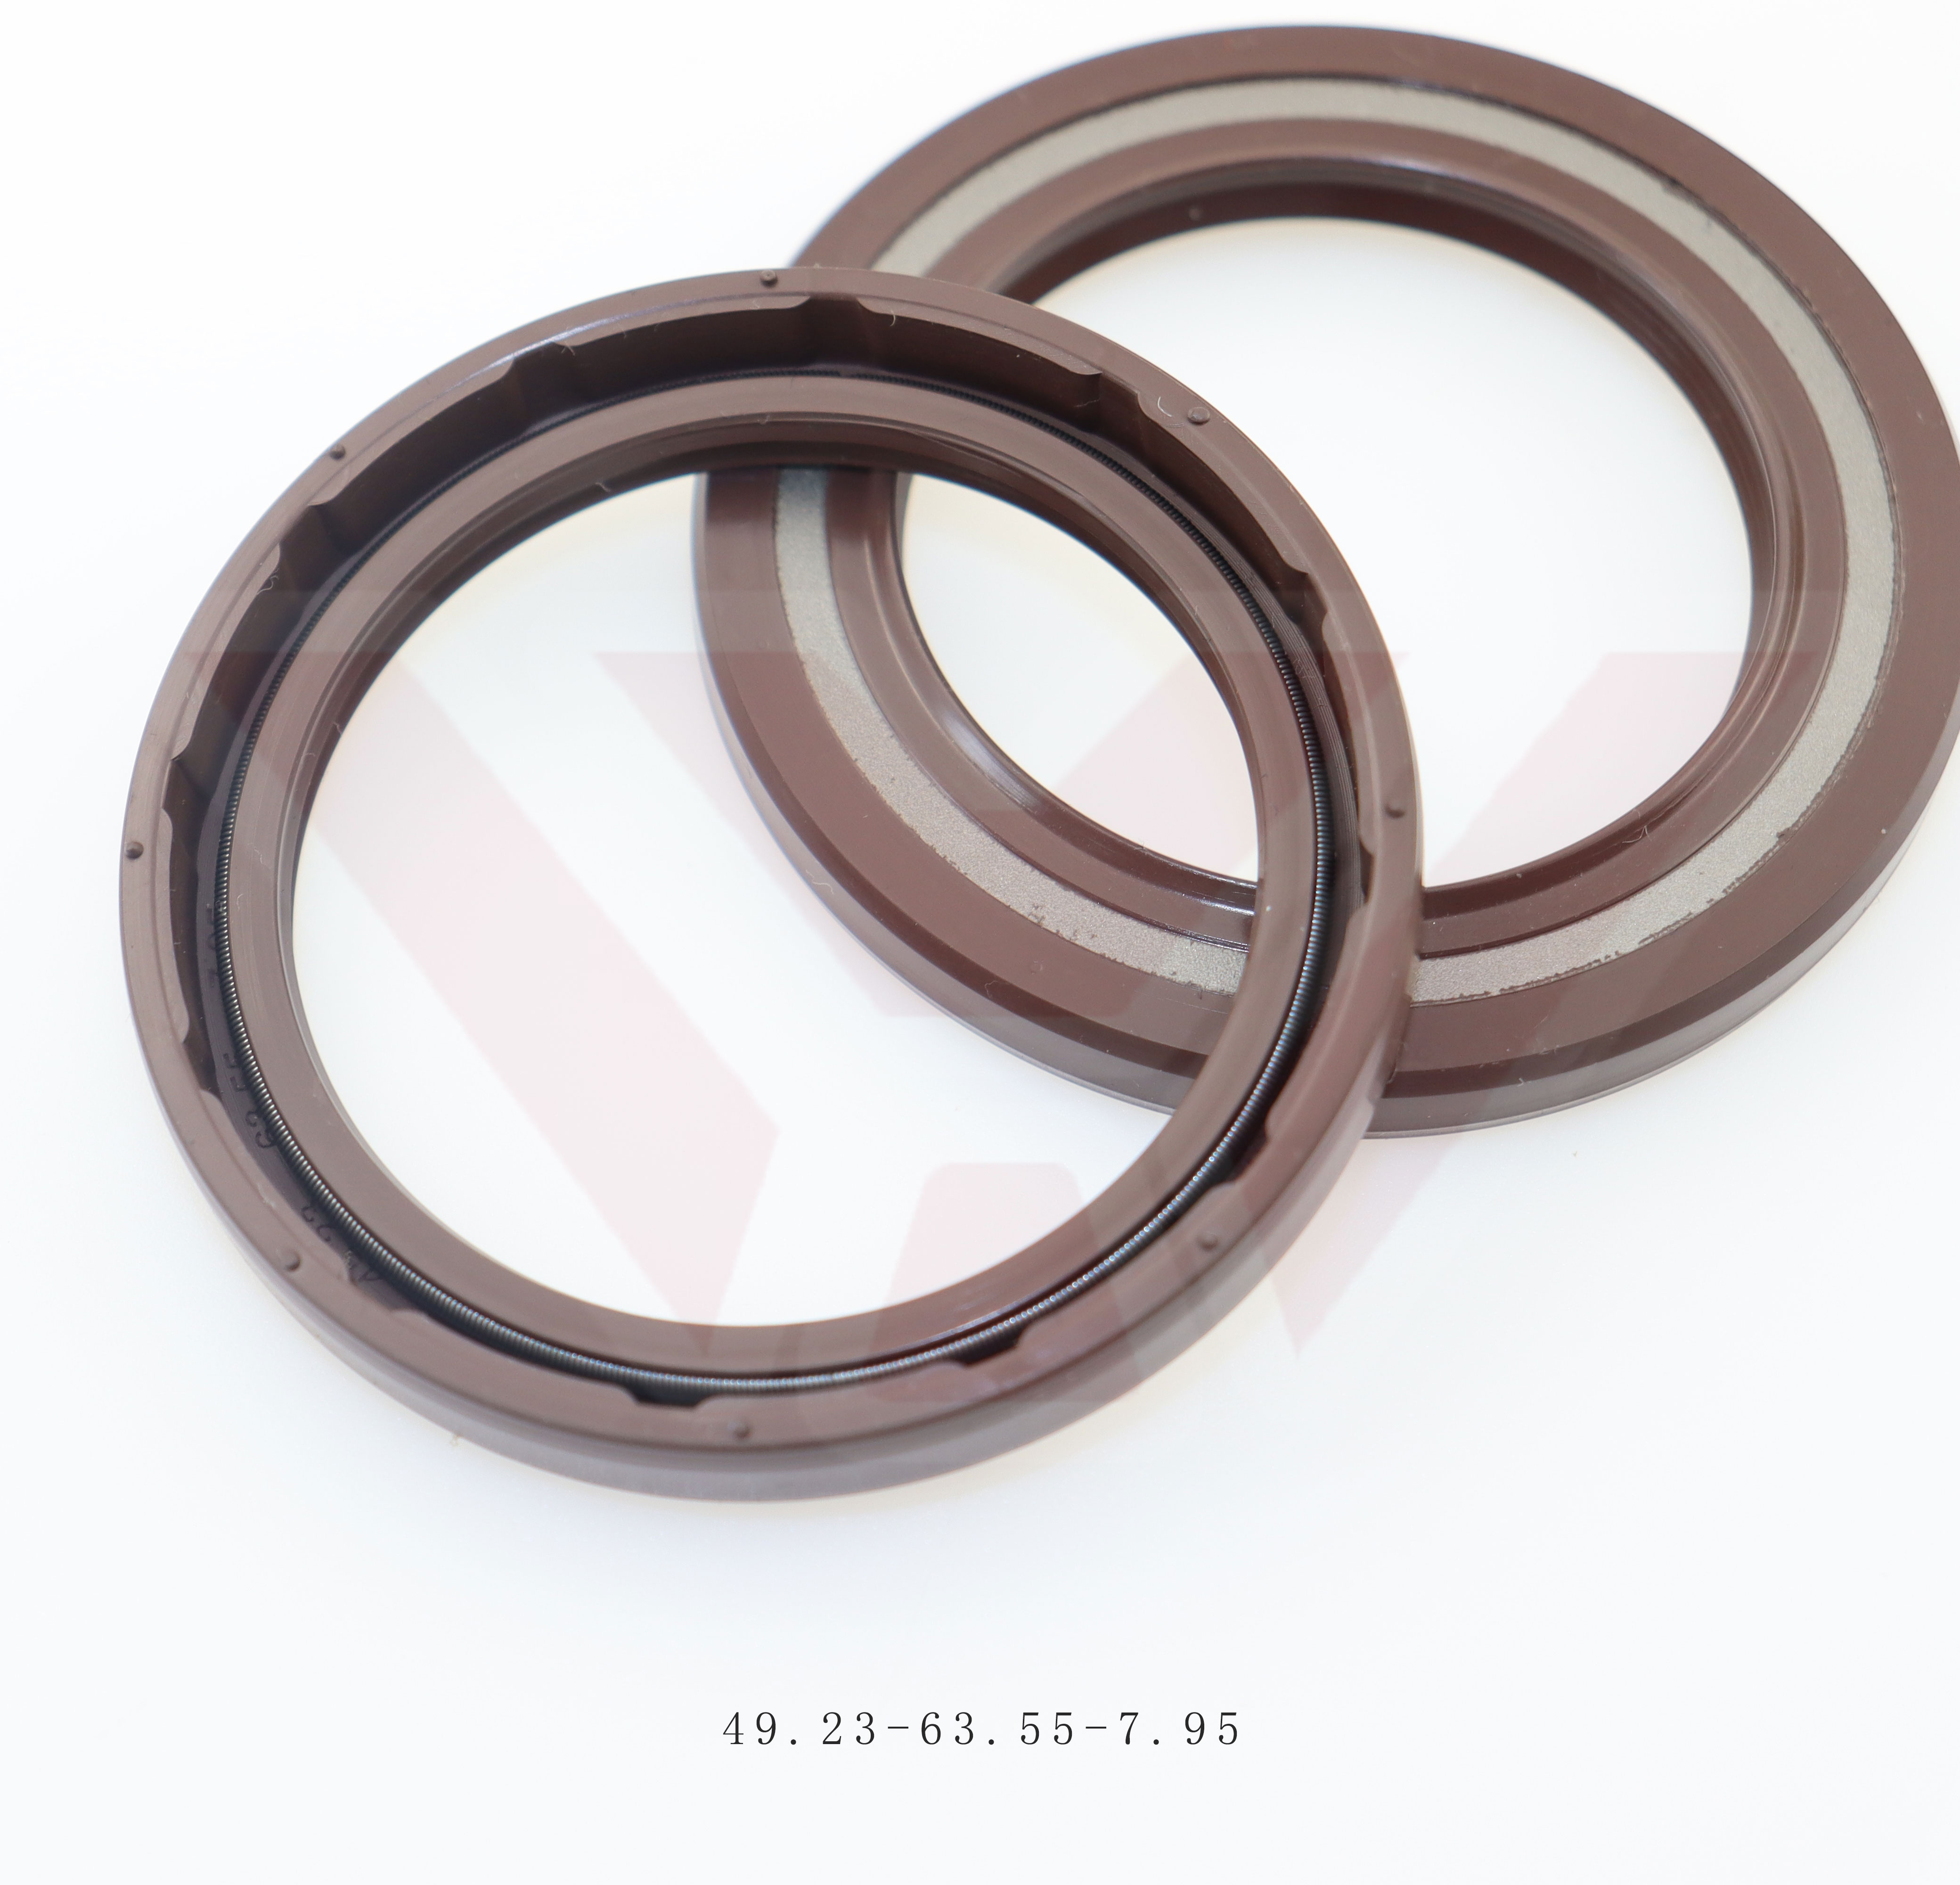 High Quality Tcv Oil Seal Hydraulic Seal Made in China